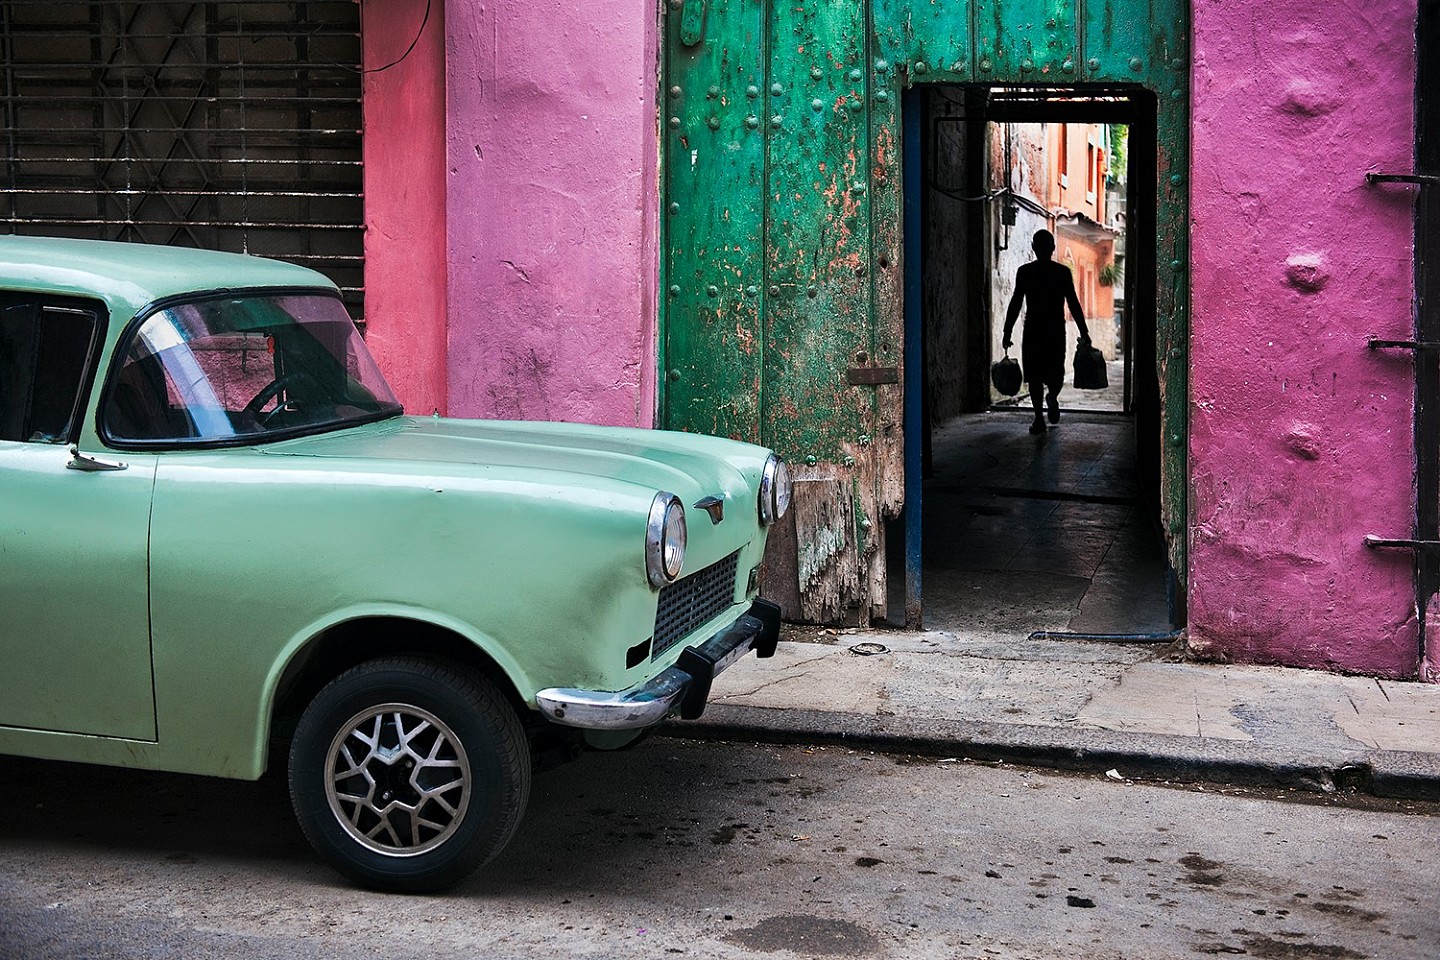 Steve McCurry, Russian Car in Old Havana, 2010
FujiFlex Crystal Archive Print
Price/Size on request